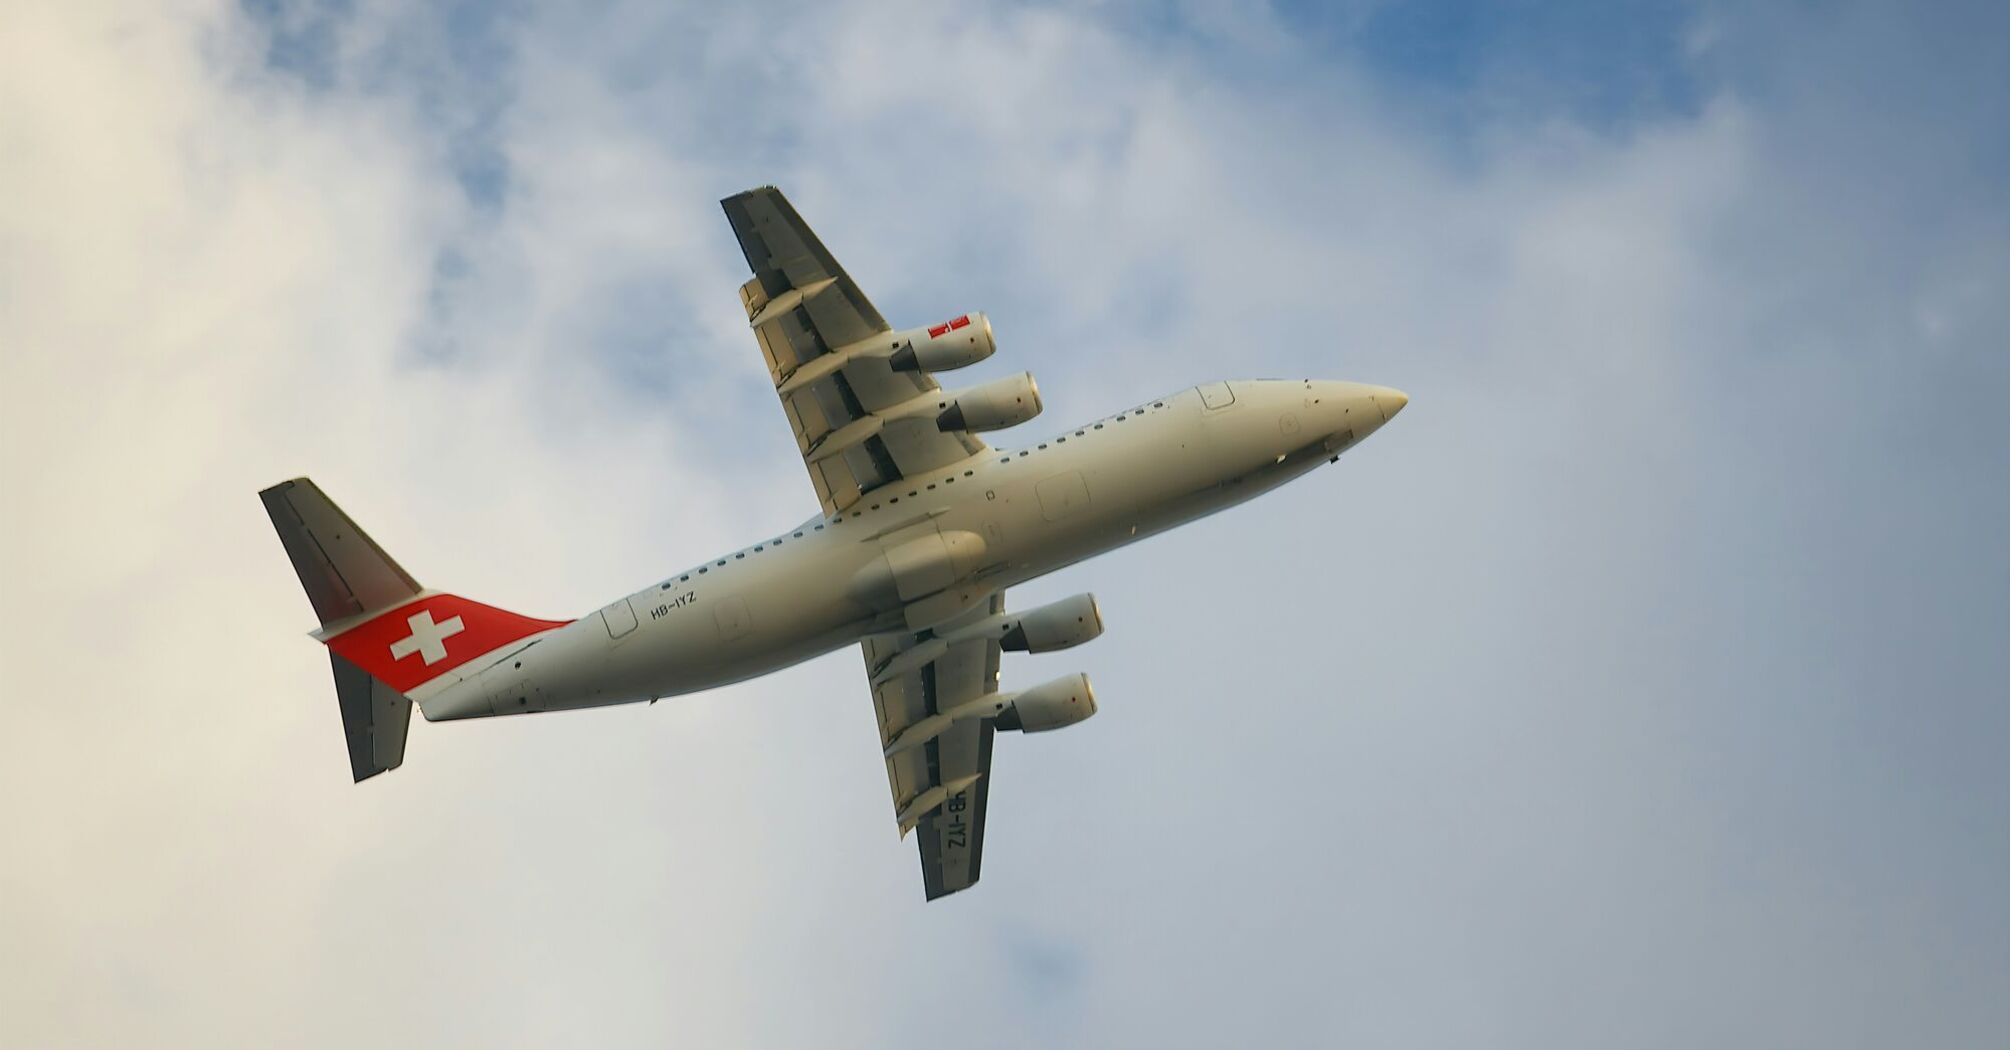 Swiss AirLines plane in the air